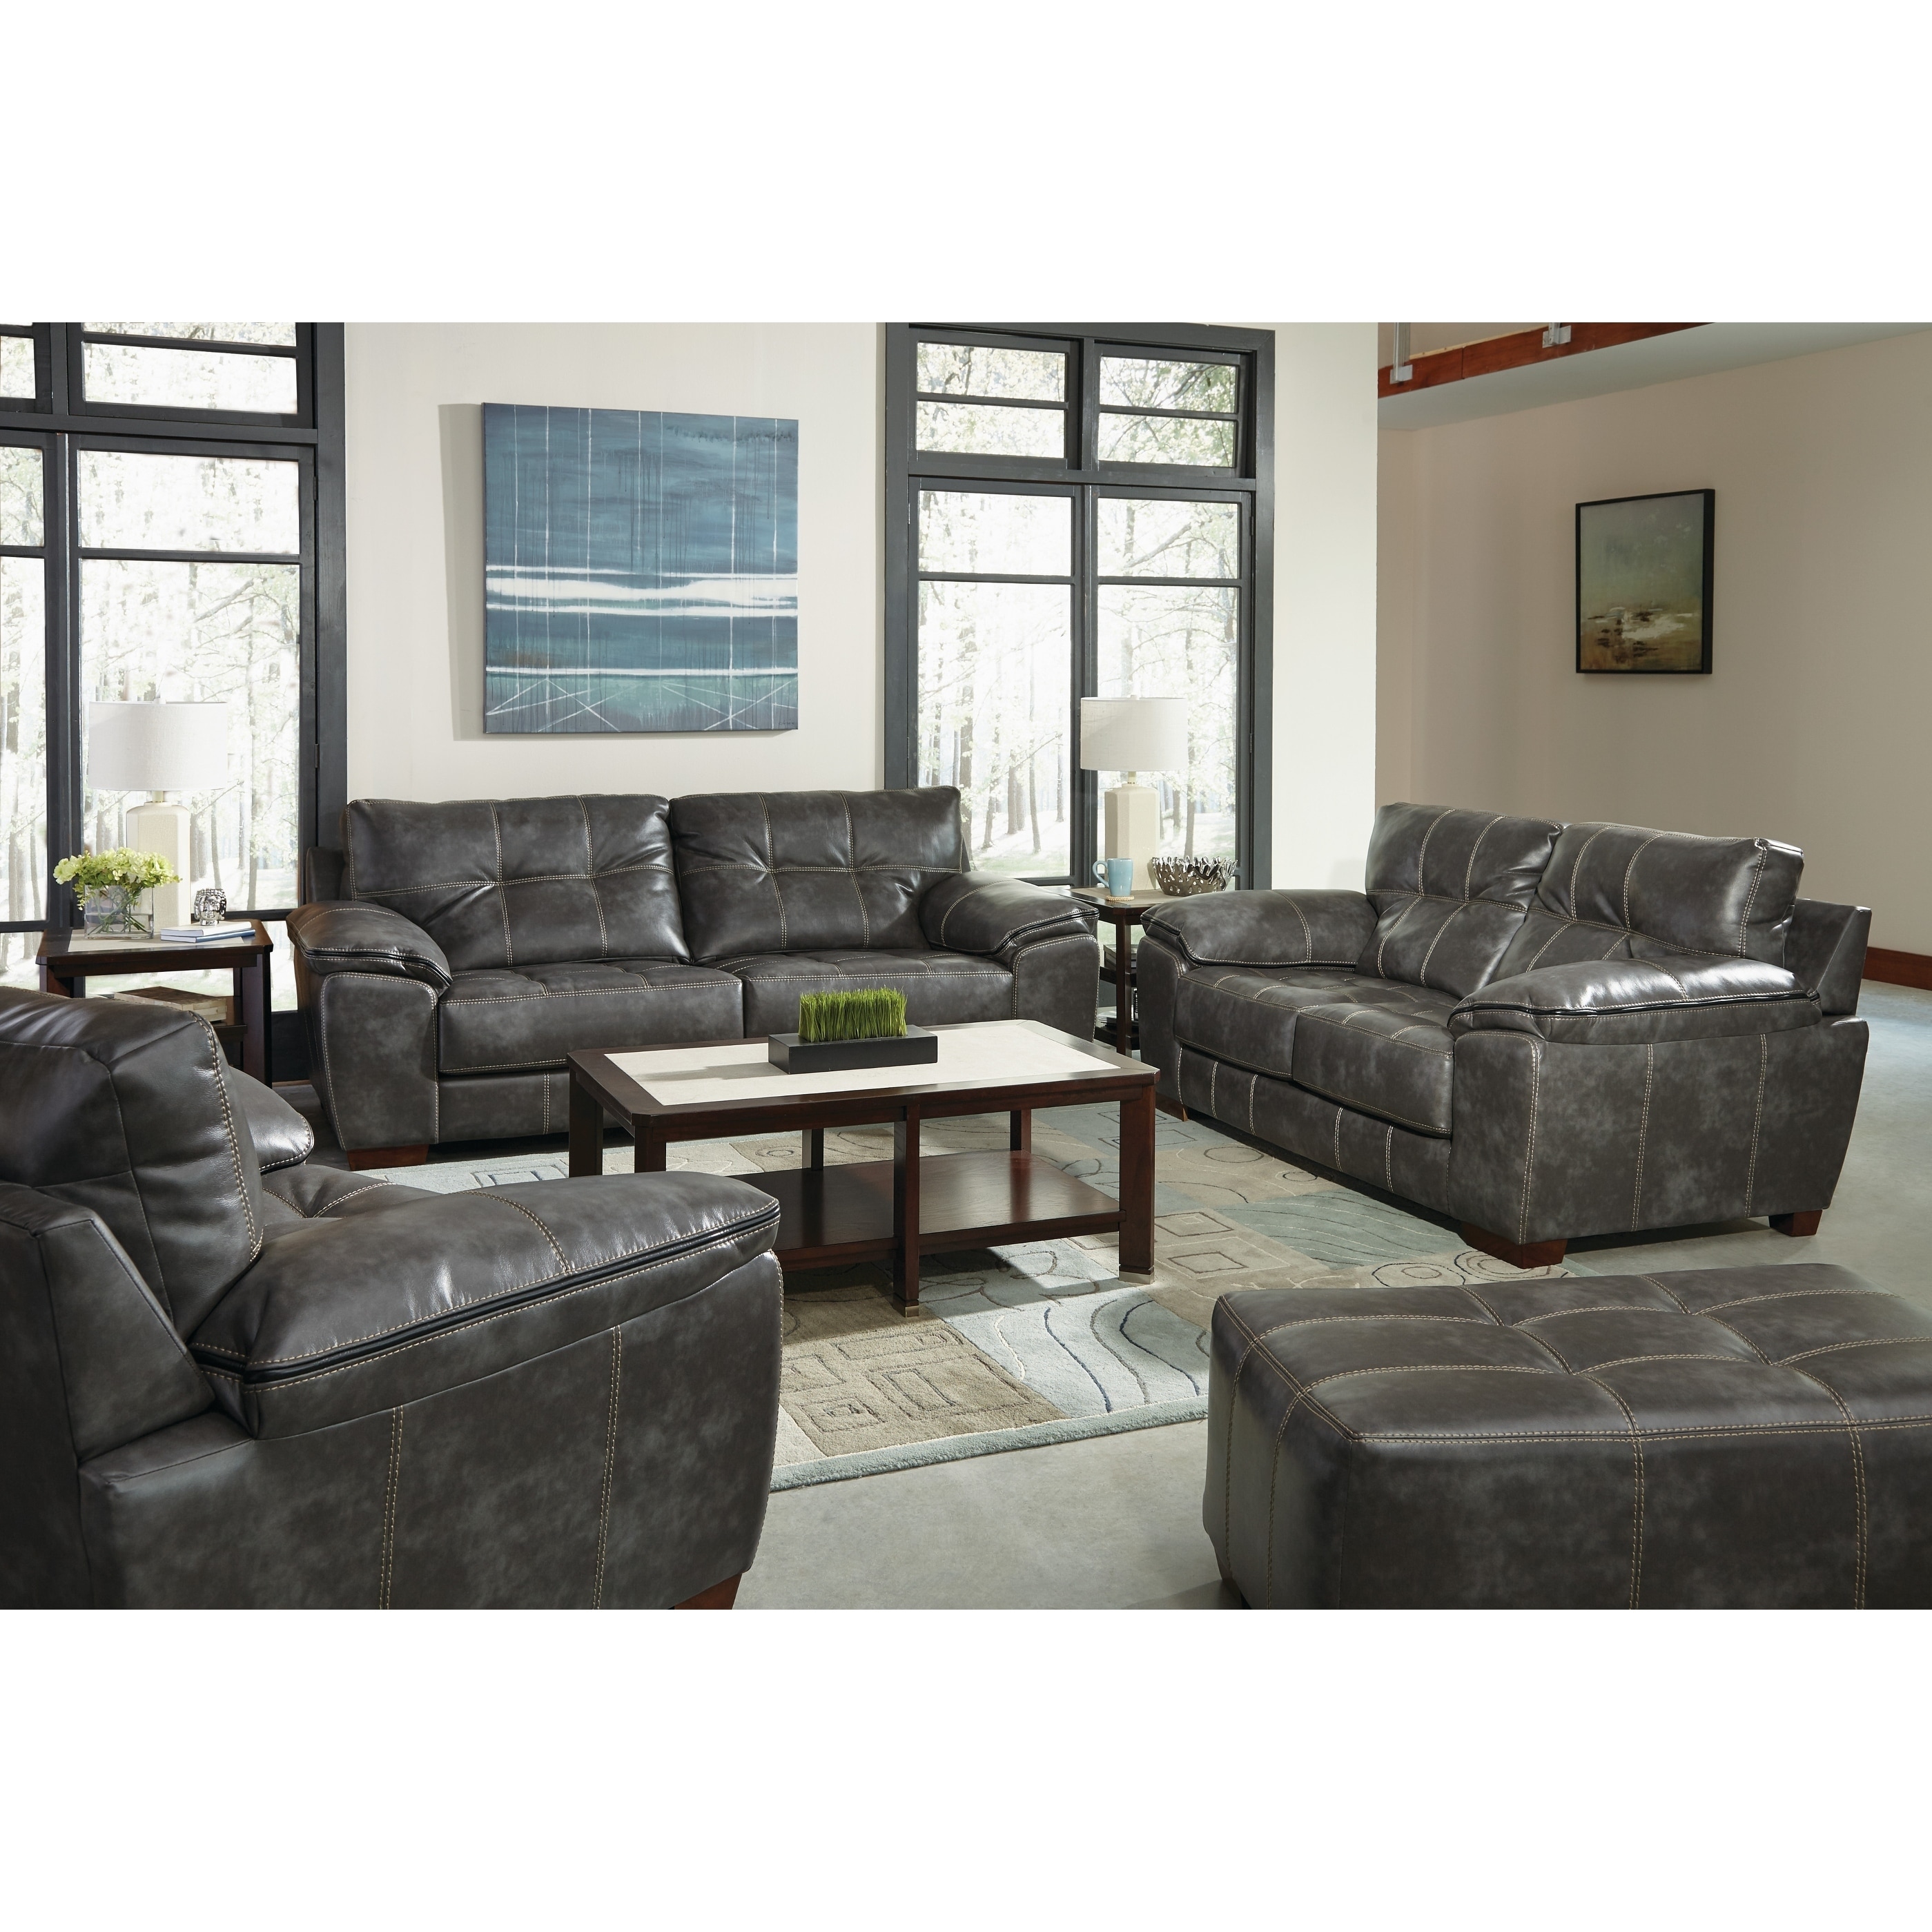 Elmer Faux Leather Sofa And Loveseat Living Room Set On Sale Overstock 29587354